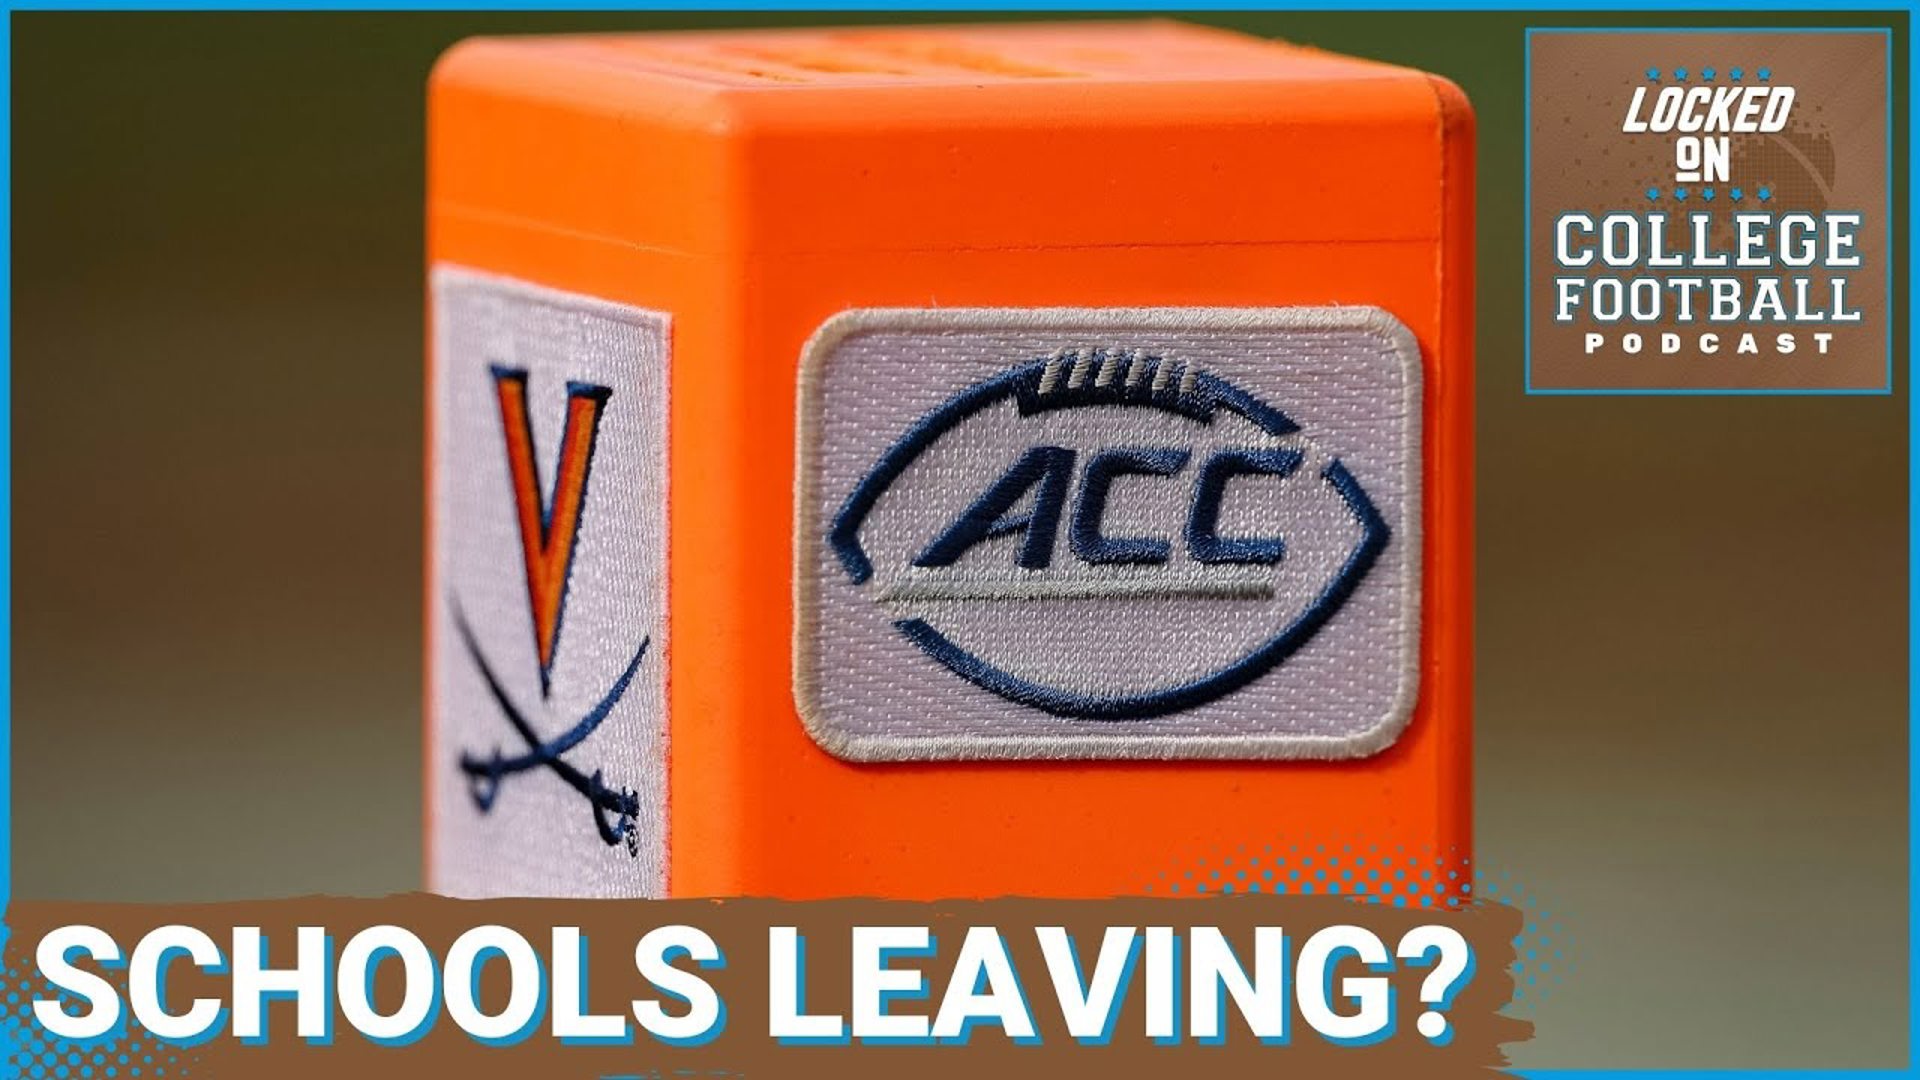 CBS Sports' Josh Pate sent a cryptic tweet indicating that the ACC could soon be losing teams from the conference. Why would he tweet that?